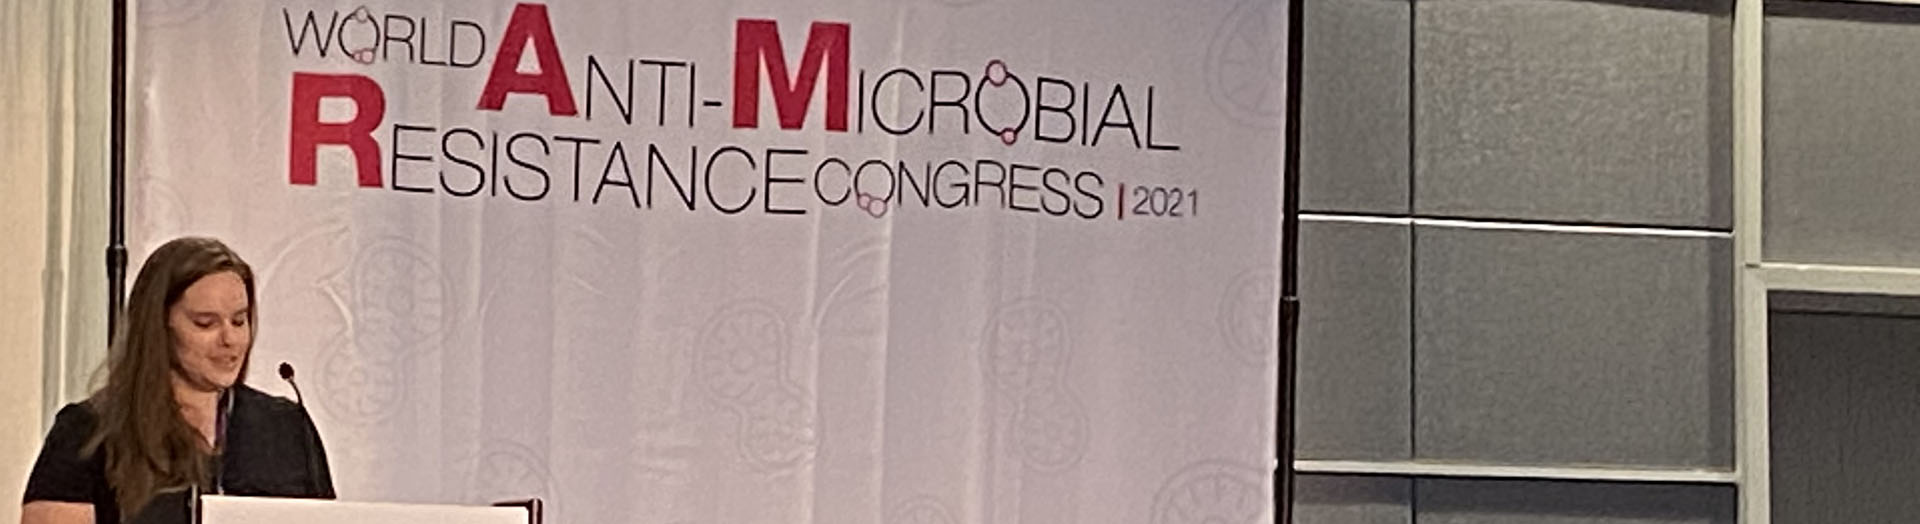 Outsmarting AMR: Economist Impact at the 2021 World Anti-Microbial Resistance Congress